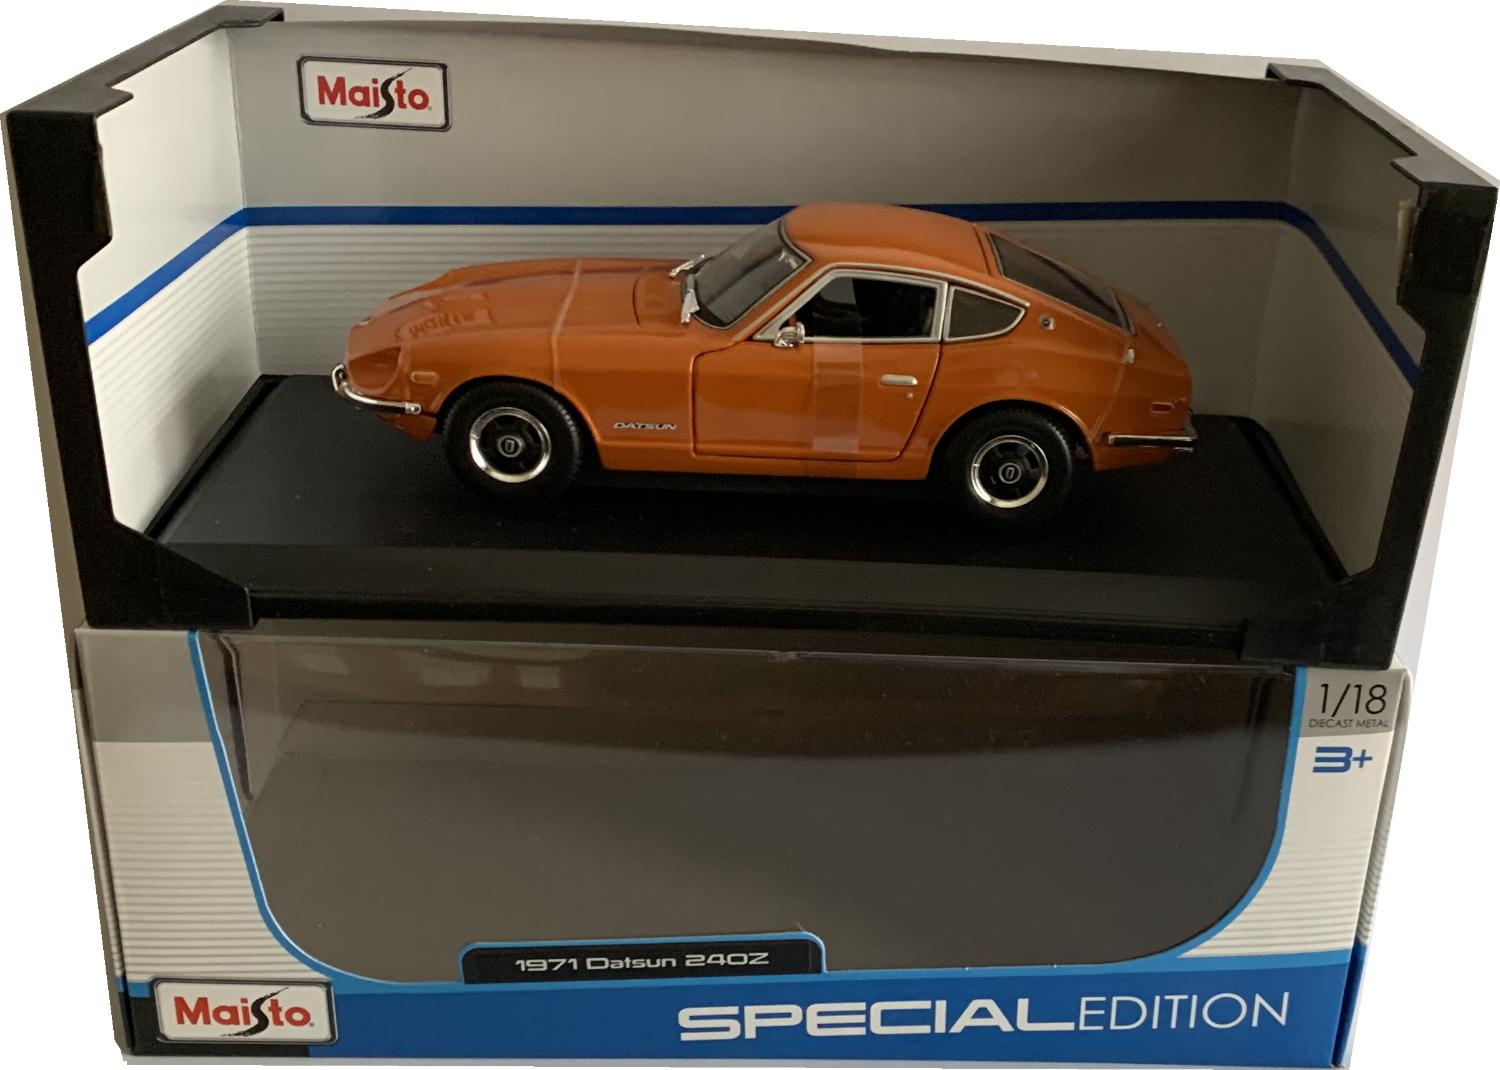 An excellent scale model of the Datsun 240Z with high level of detail throughout, all authentically recreated.  Model is presented on a removable plinth in a window display box.  The car is approx. 24 cm long and the presentation box is 34 cm long